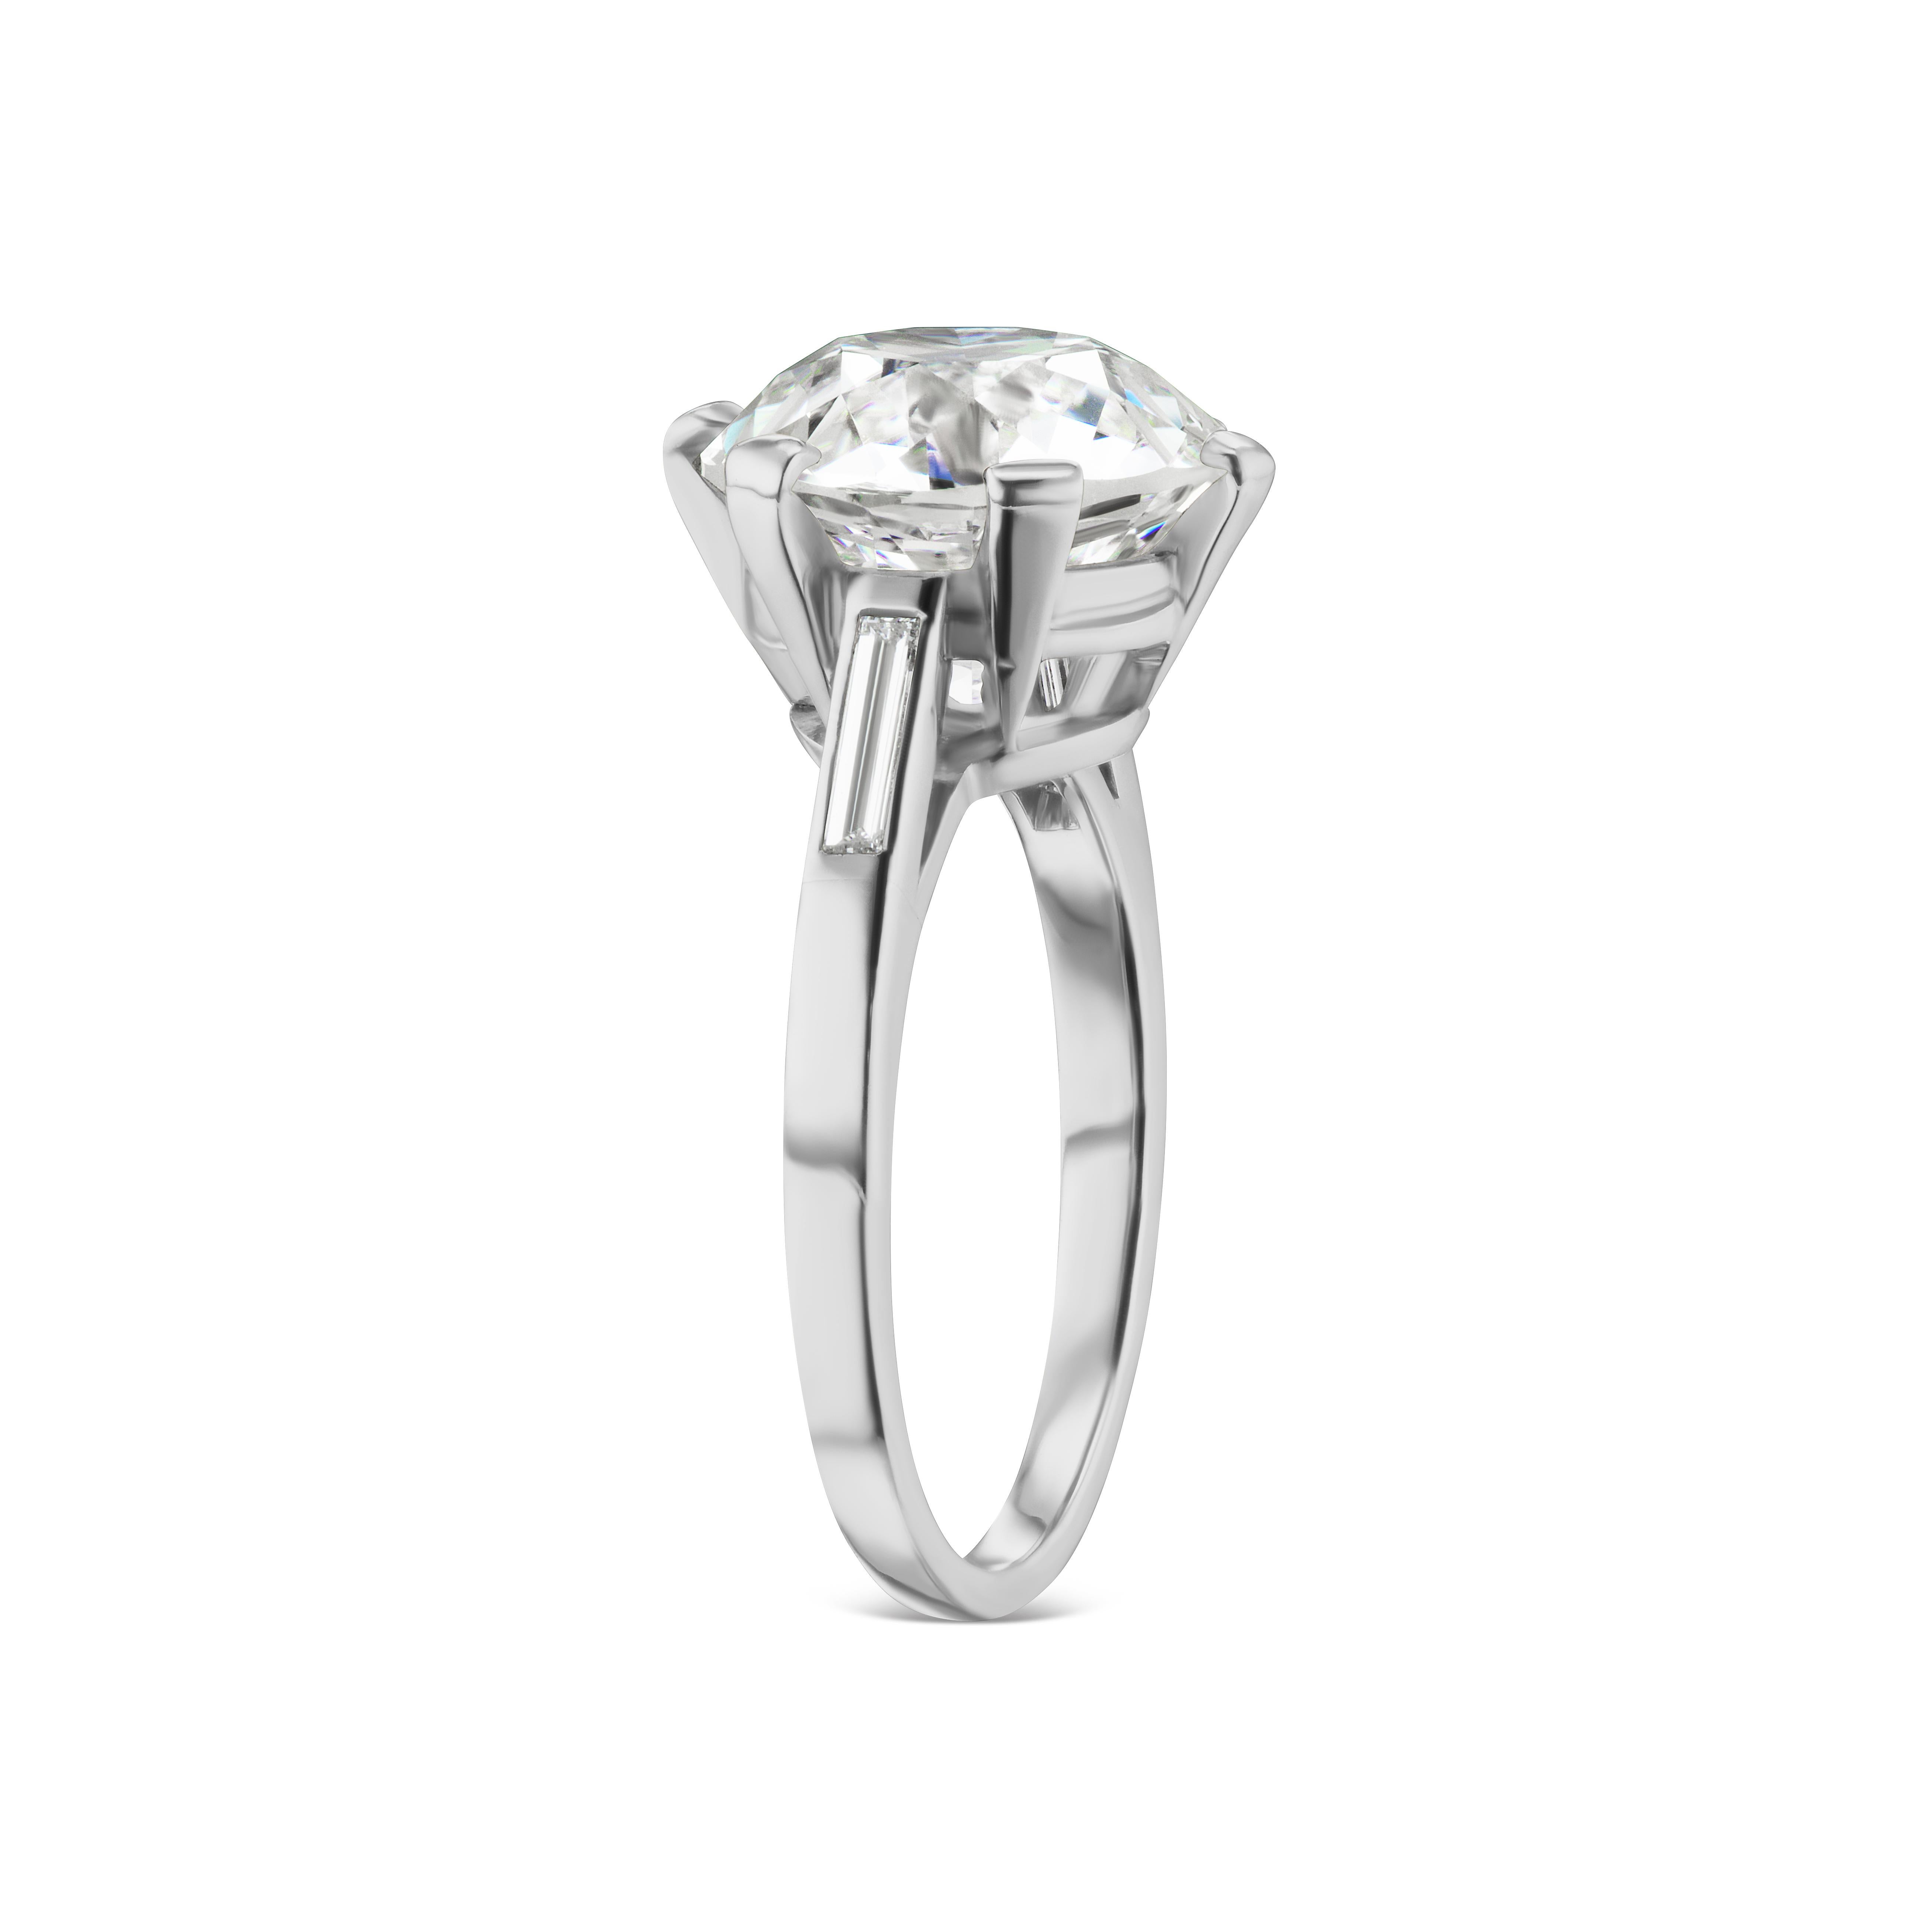 Sometimes you just get lucky.  This gorgeous and ultimately tasteful diamond solitaire ring is perfection. This 6.20 carats VS2 clarity Old European cut Diamond with a GIA grading report is mounted with a clean straight single baguette on each side.